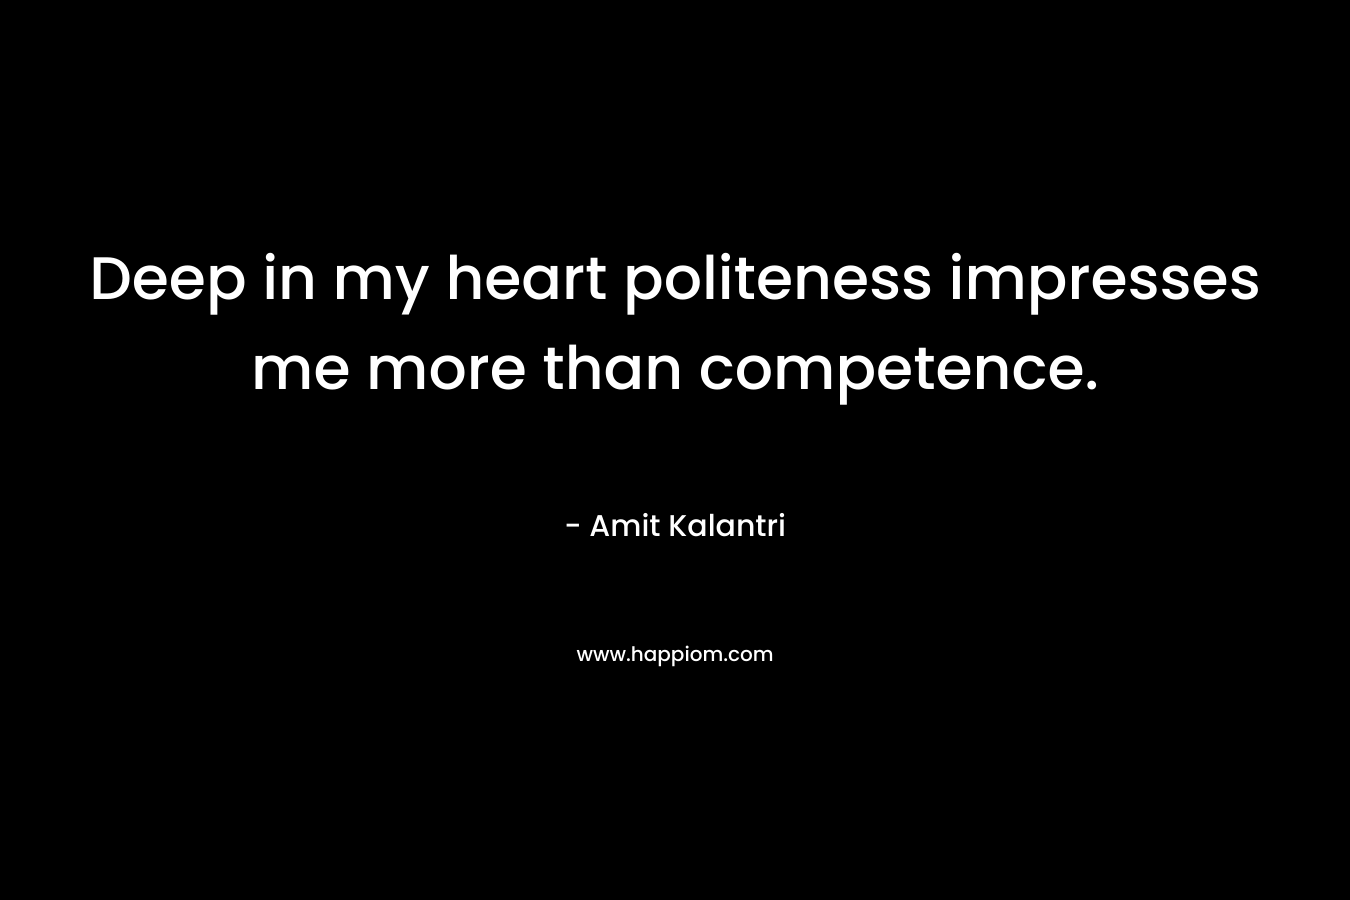 Deep in my heart politeness impresses me more than competence. – Amit Kalantri